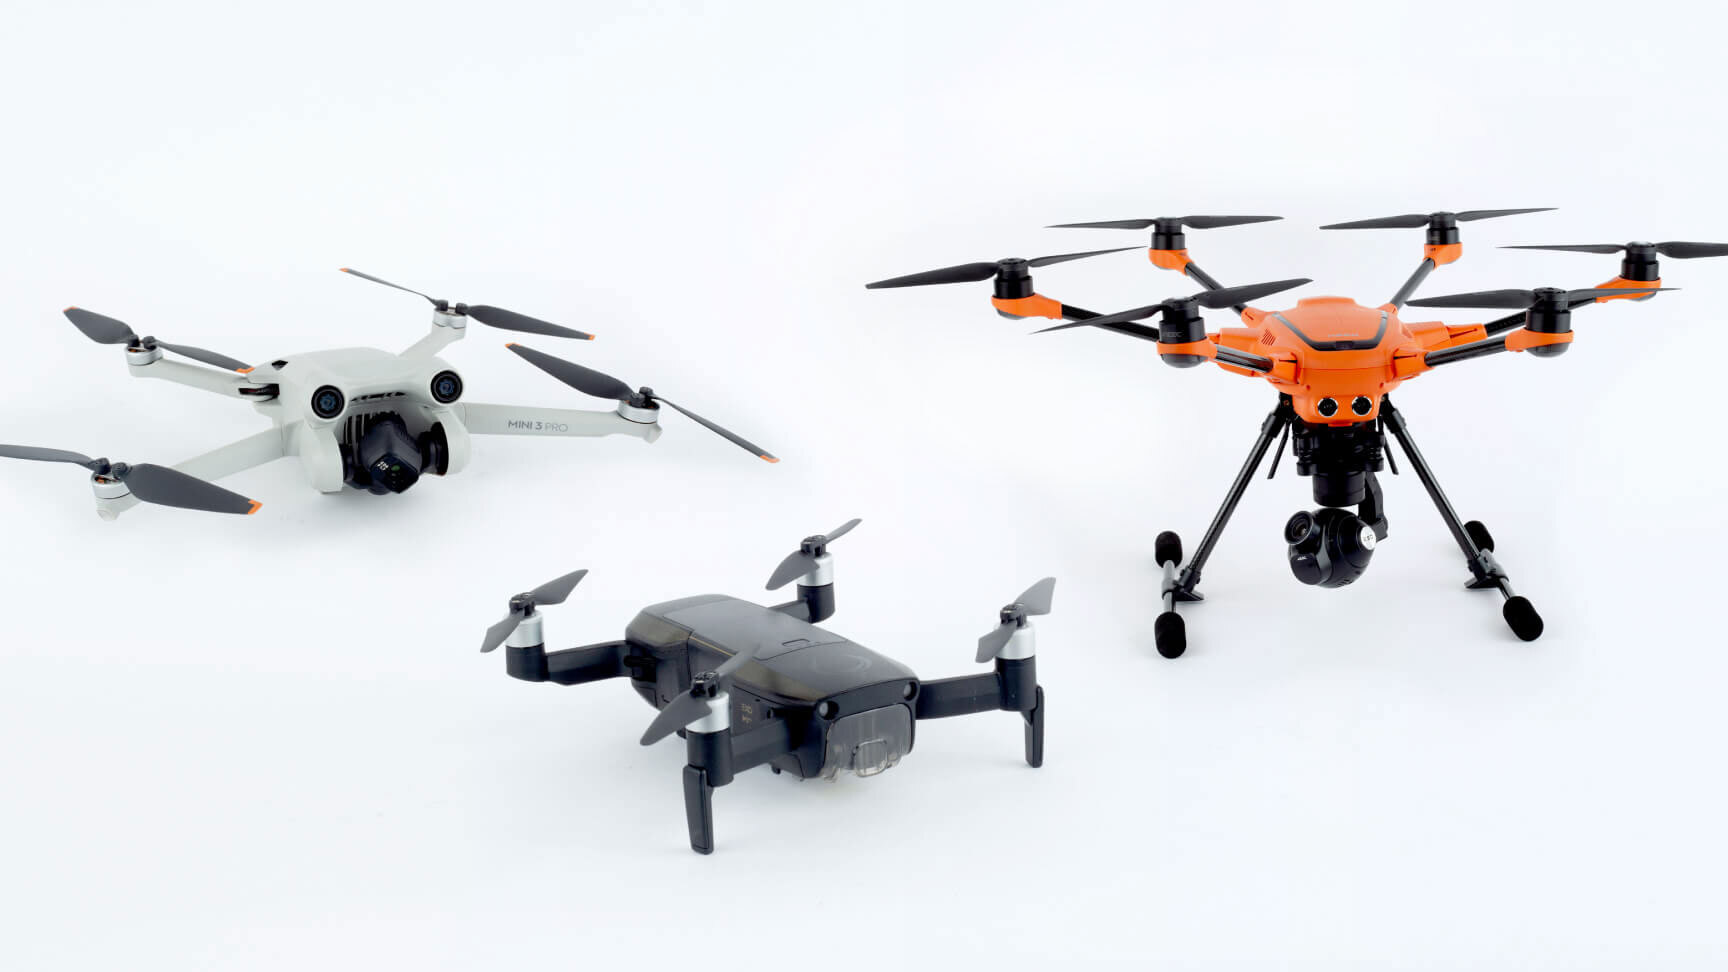 New Research: Five of the Seven Drone Manufacturers Tested Will Not be Remote ID Compliant on March 16